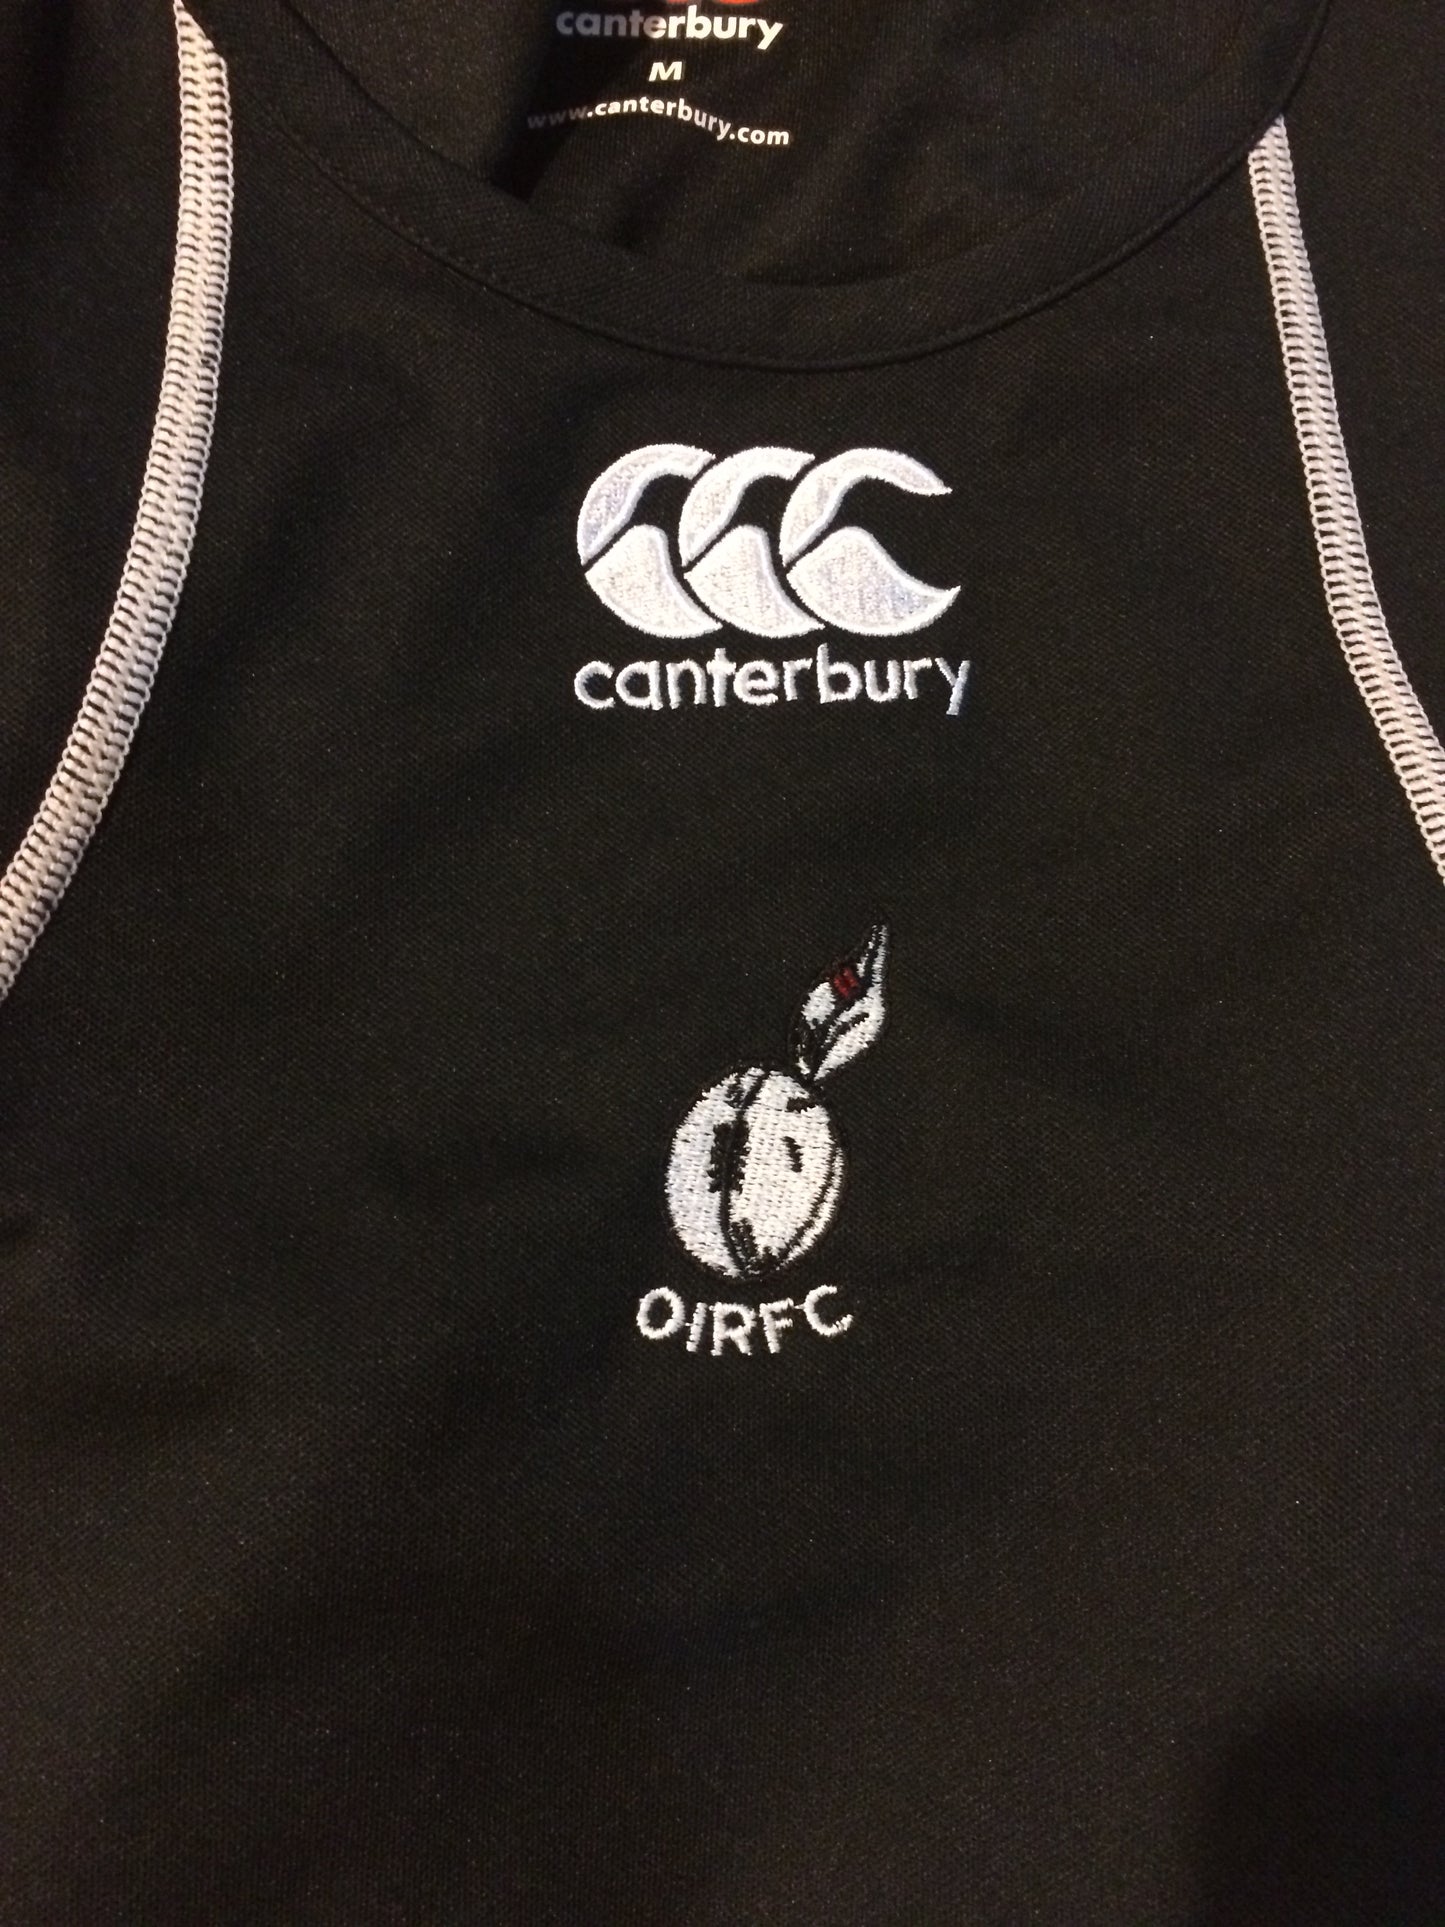 Canterbury Dry Fit Singlet